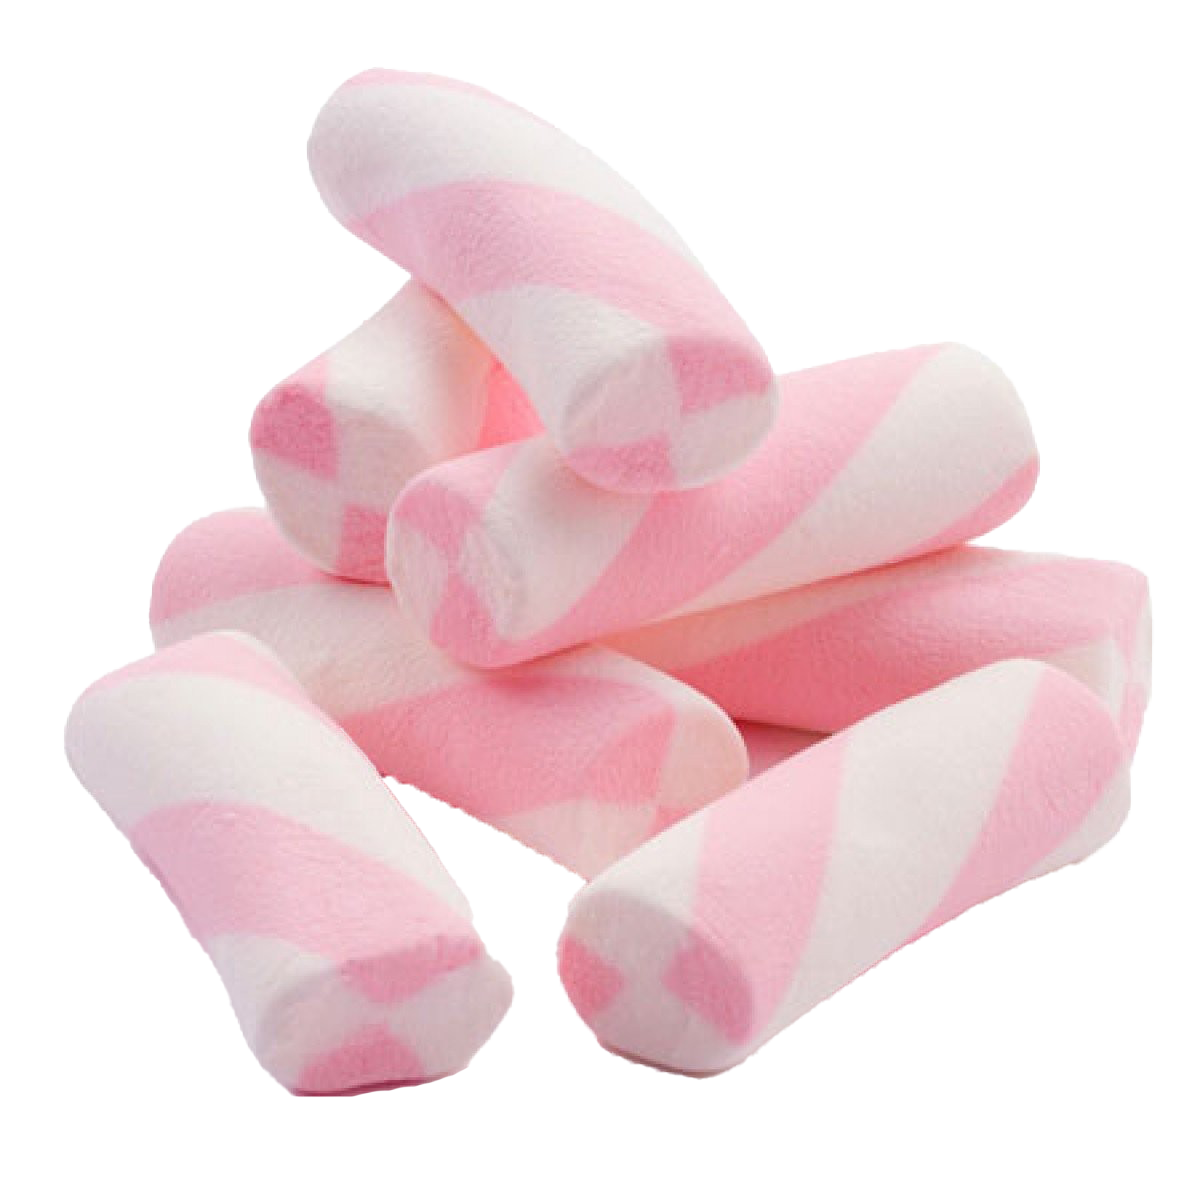 A Pile Of Pink And White Marshmallows